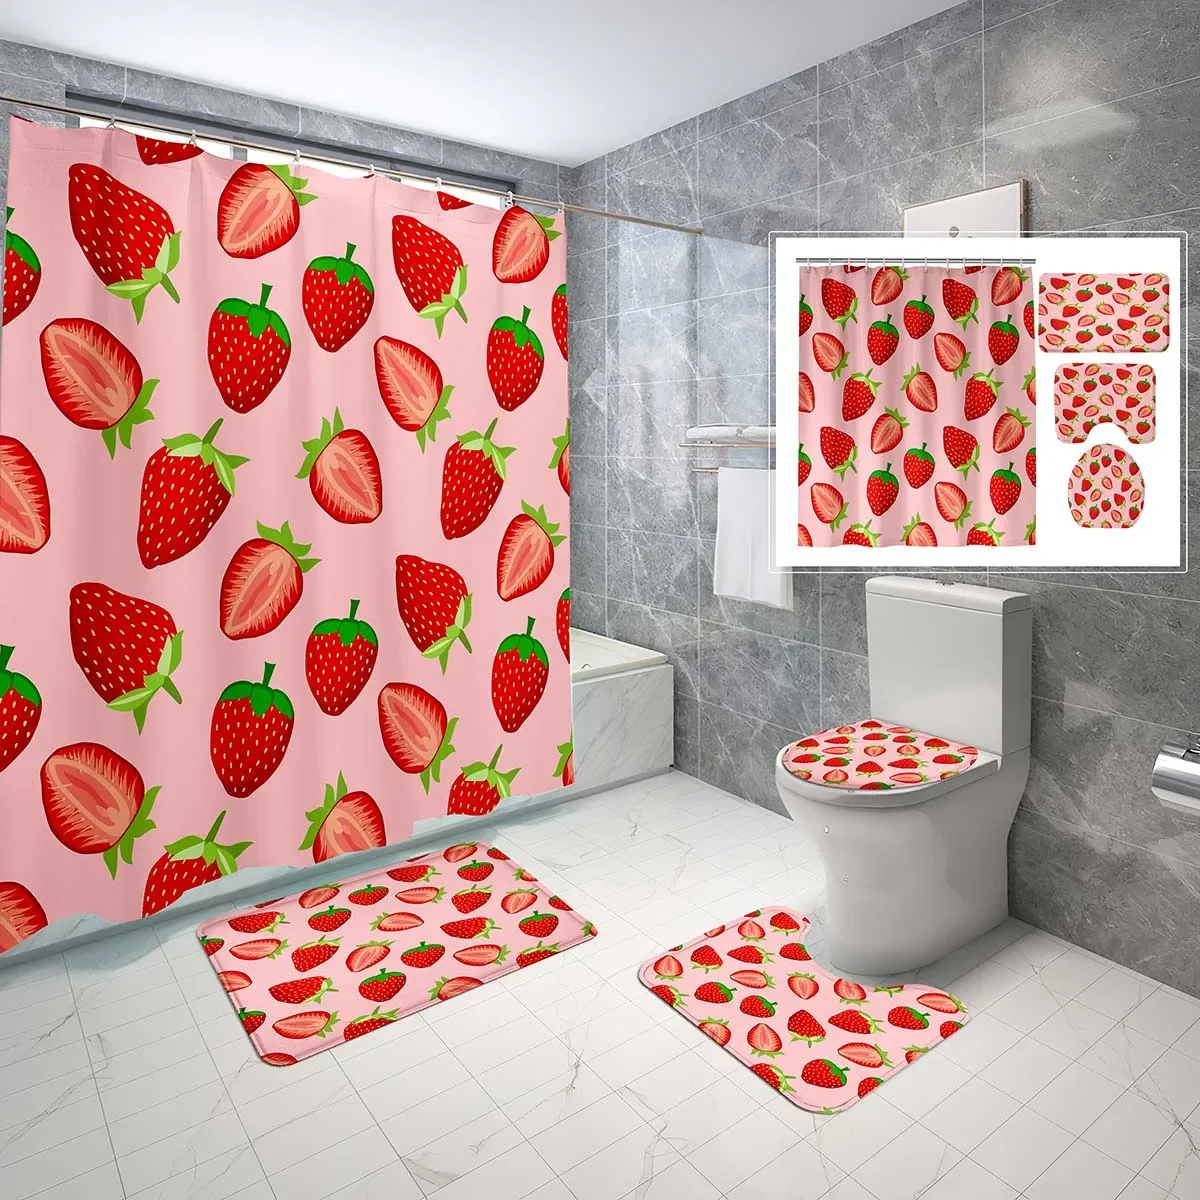 

4 Sets Cartoon Strawberry Shower Curtain Sets with Non-Slip Bath Mat,Toilet Lid Cover and Cute Berry for Kids Shower Curtain Set